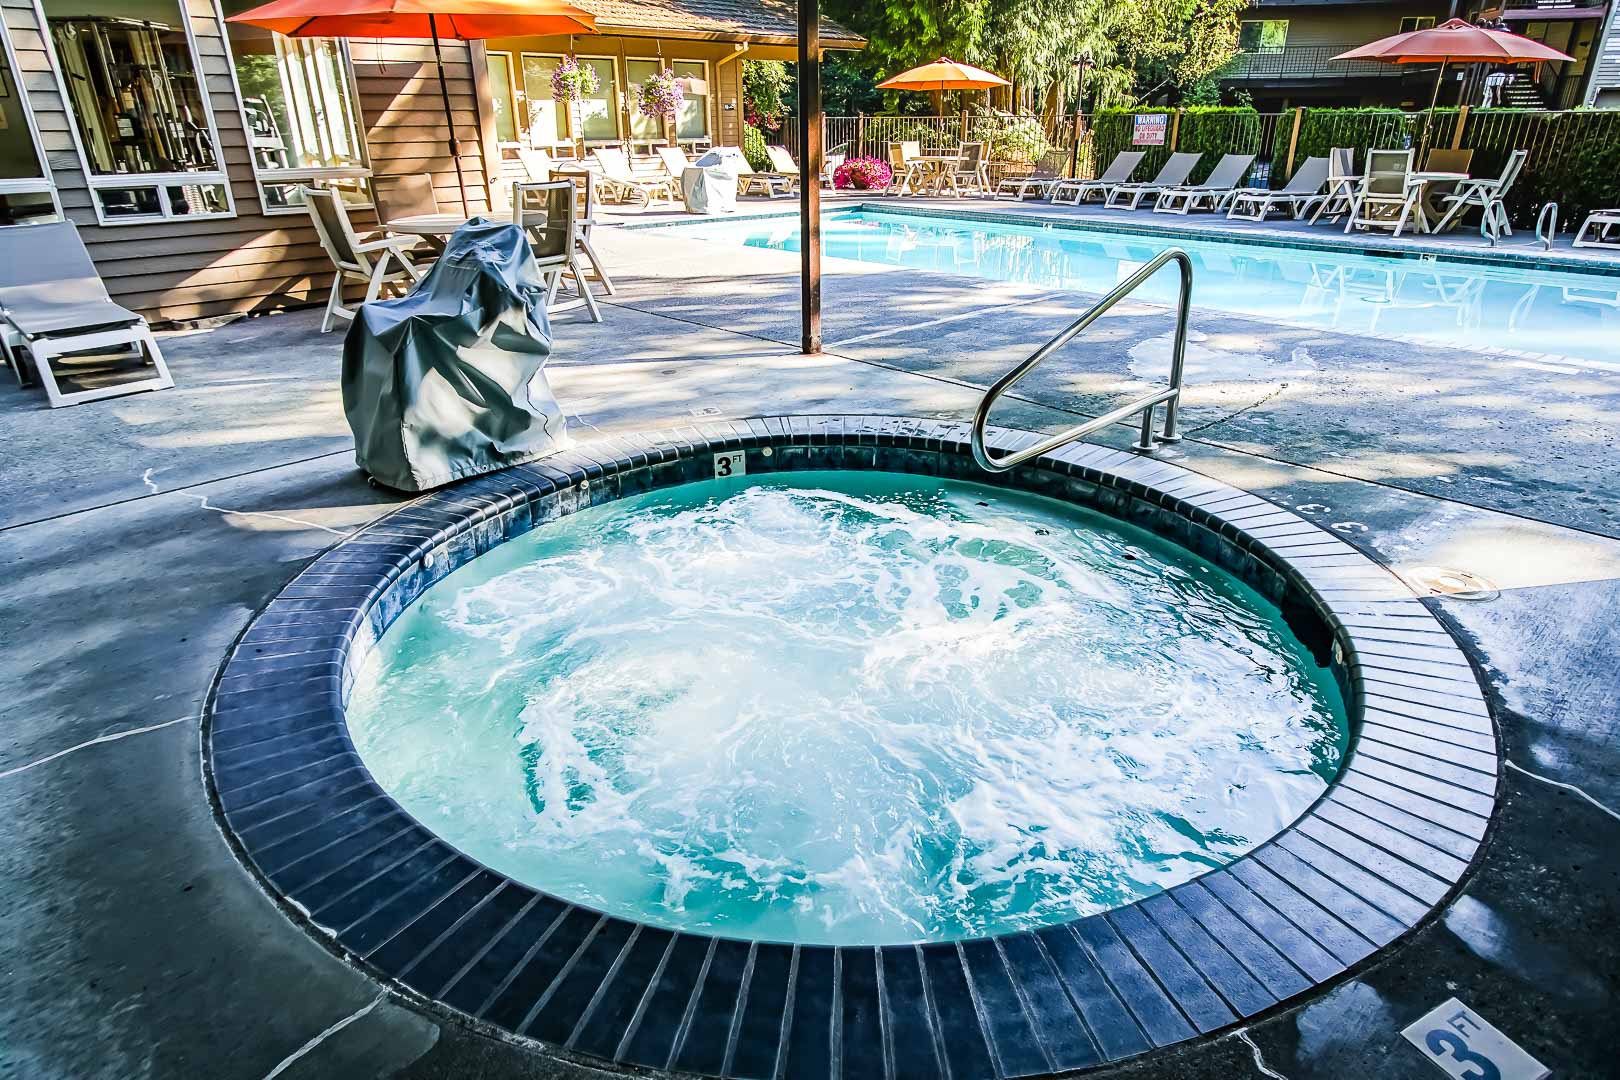 A relaxing outdoor Jacuzzi tub at VRI's Whispering Woods Resort in Oregon.